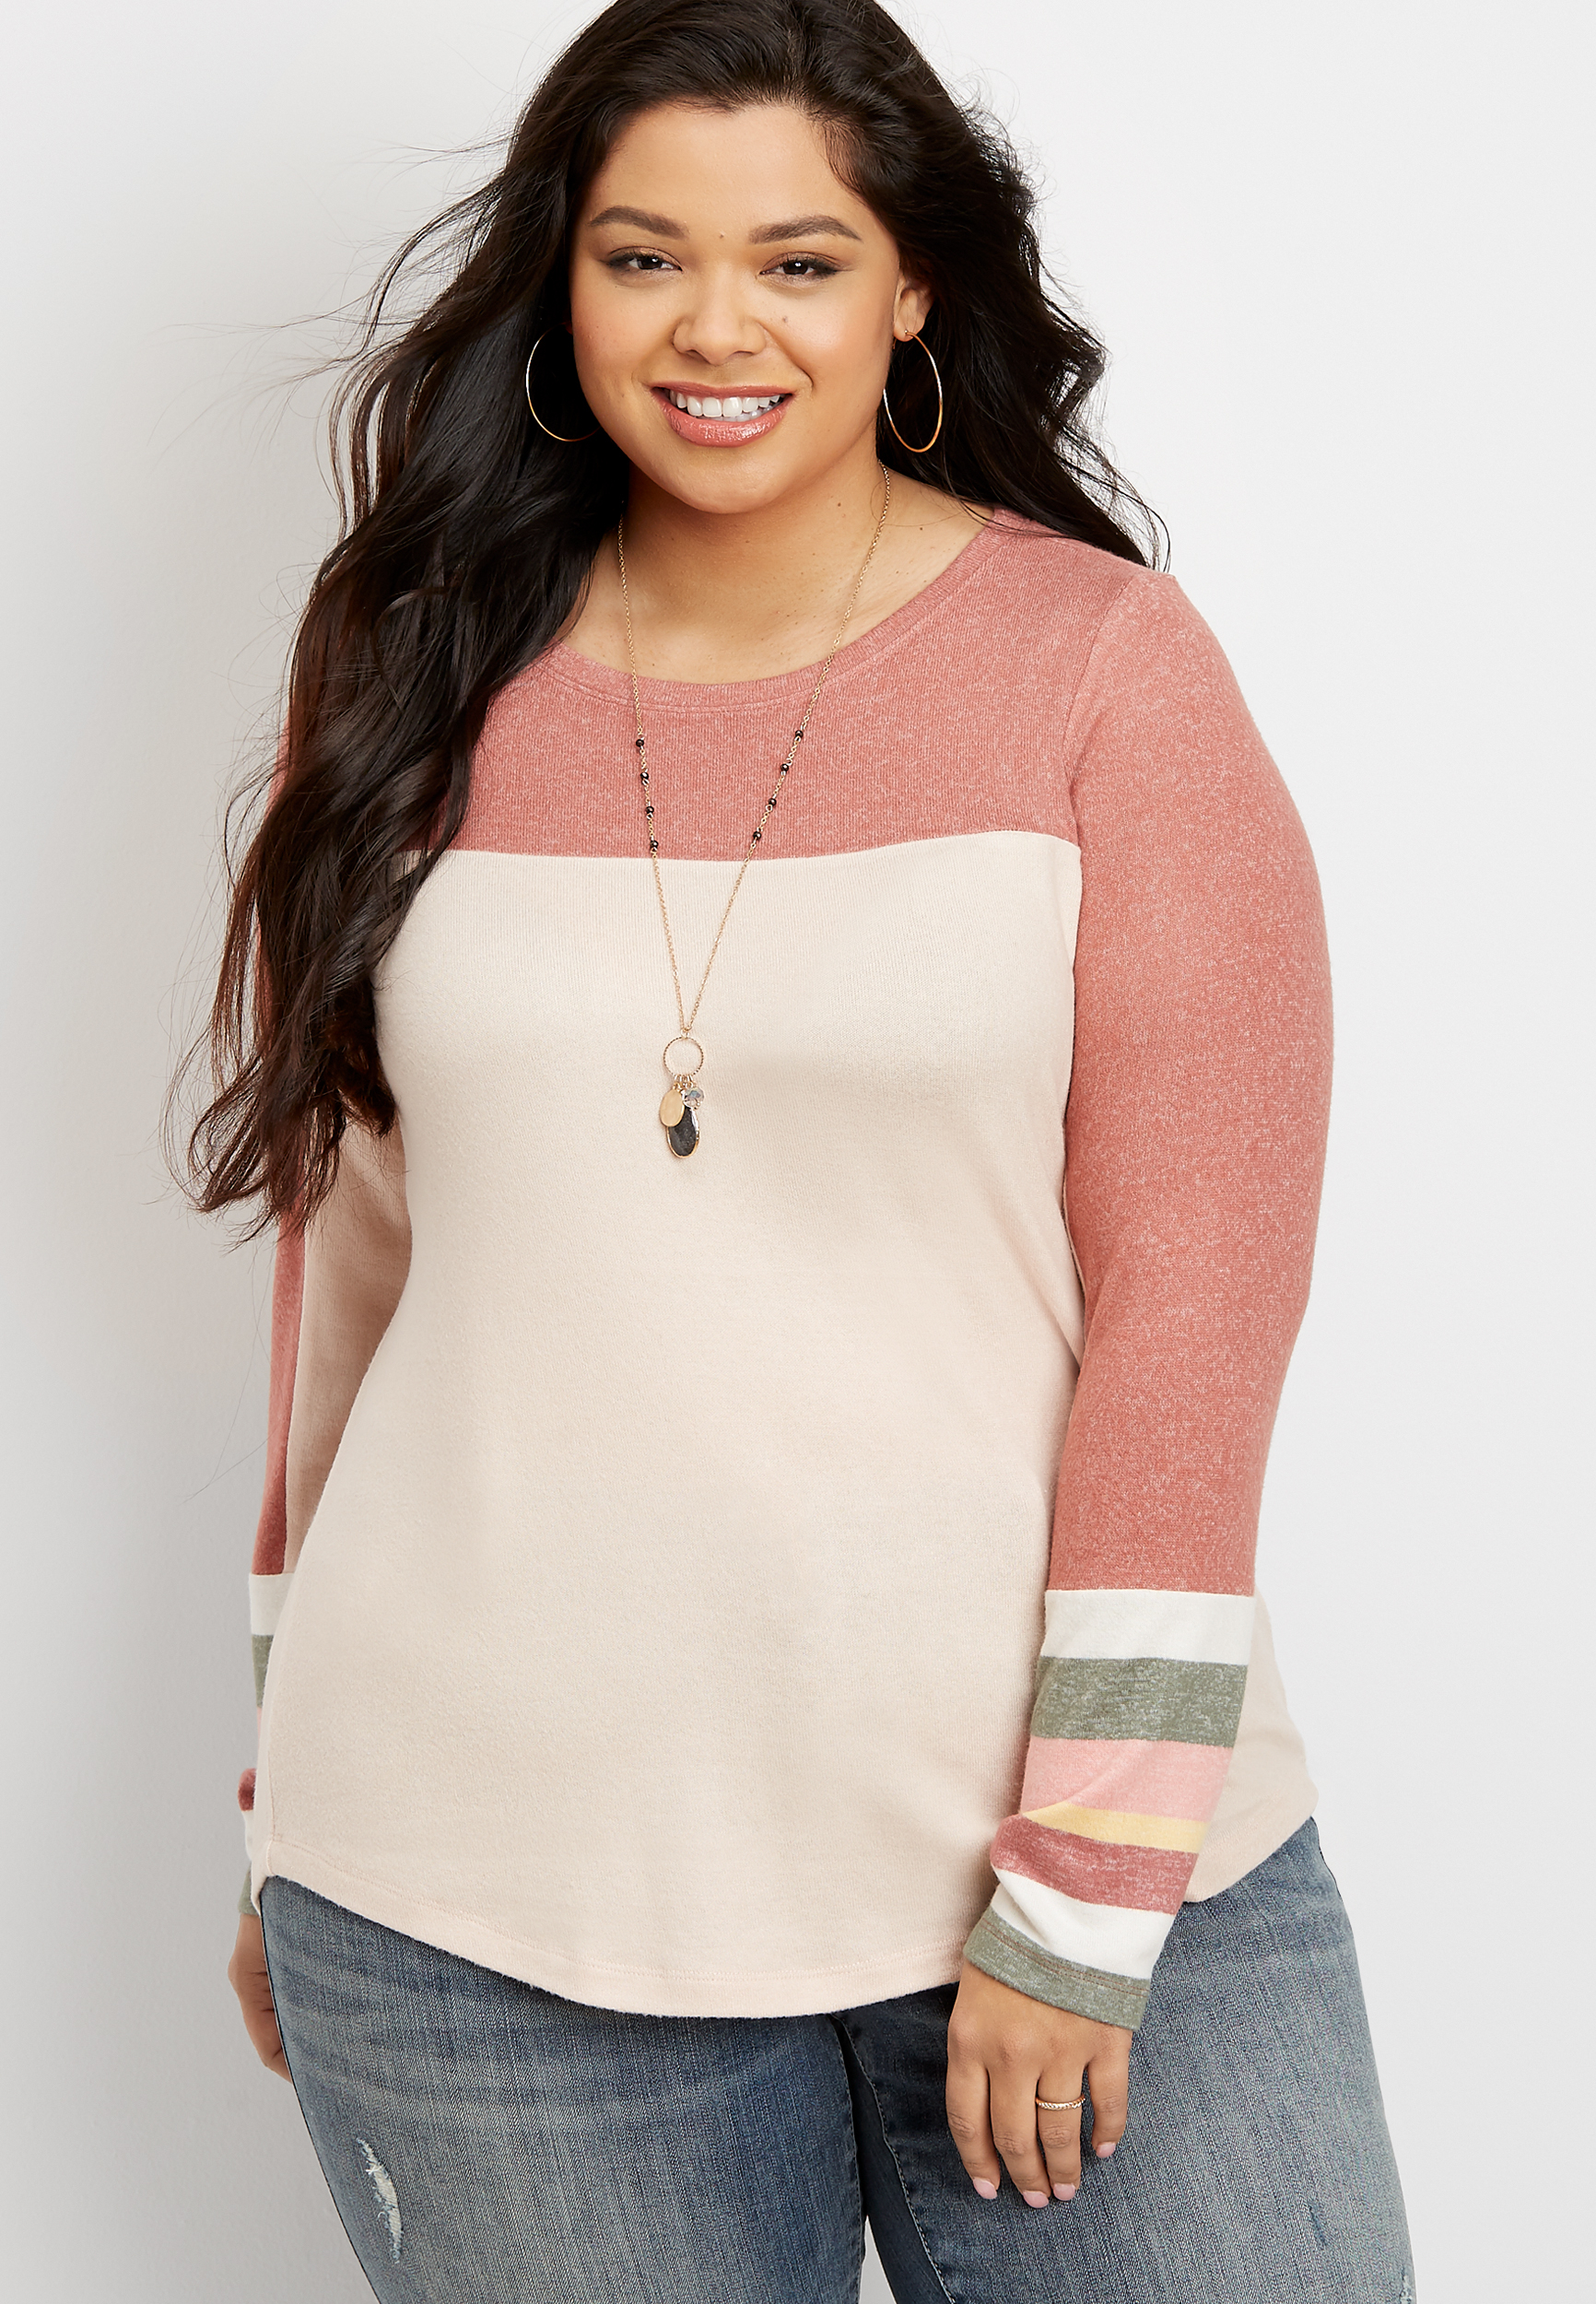 Plus Size 24/7 Stripe Colorblock Long Sleeve Tee | maurices